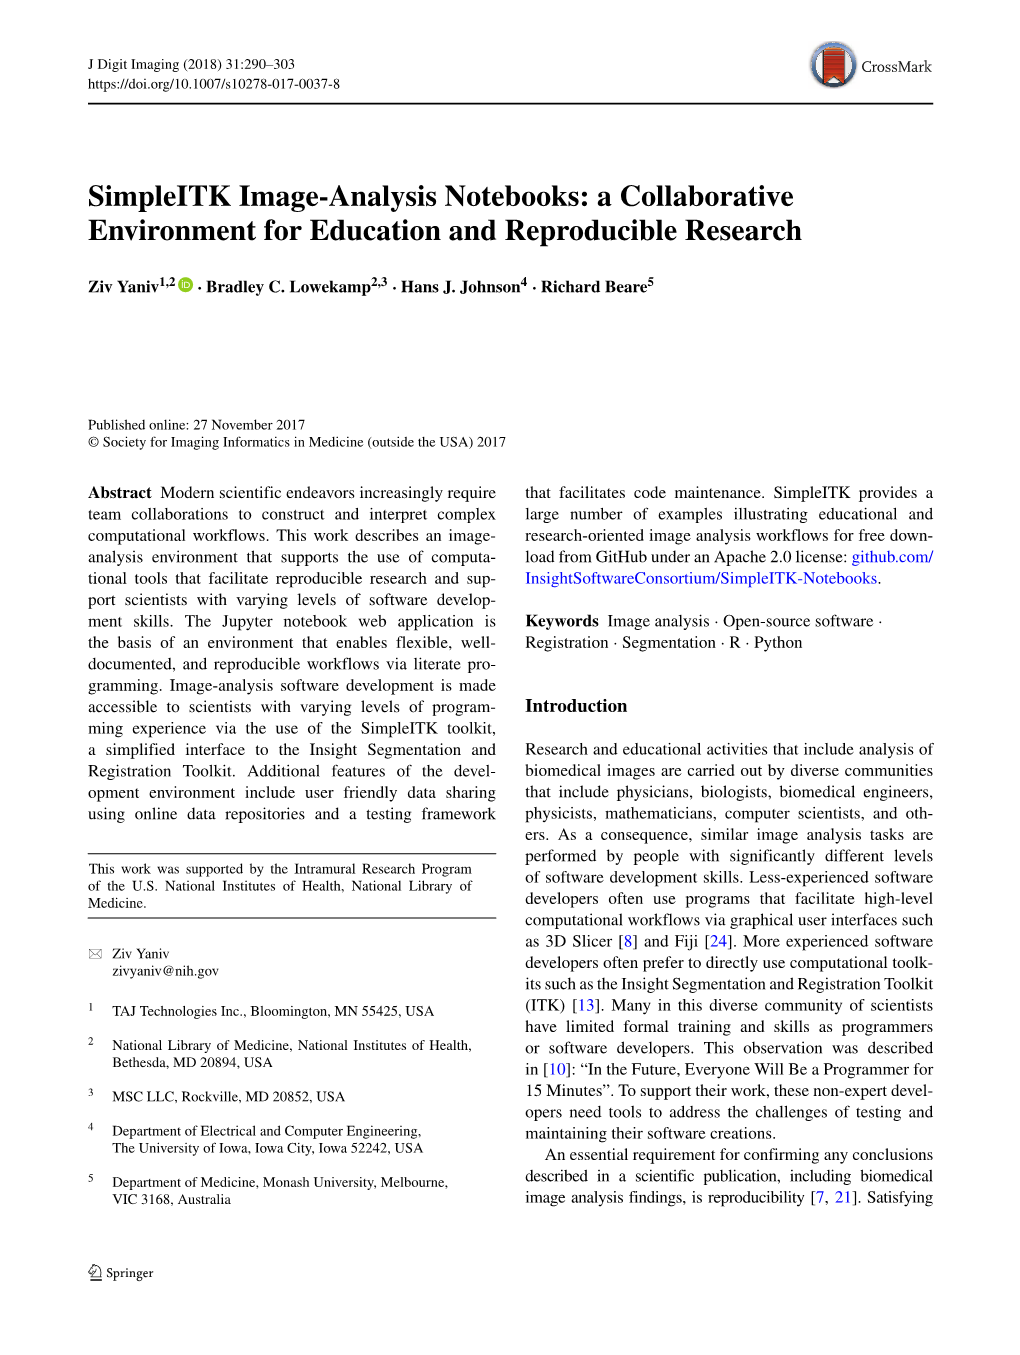 Simpleitk Image-Analysis Notebooks: a Collaborative Environment for Education and Reproducible Research